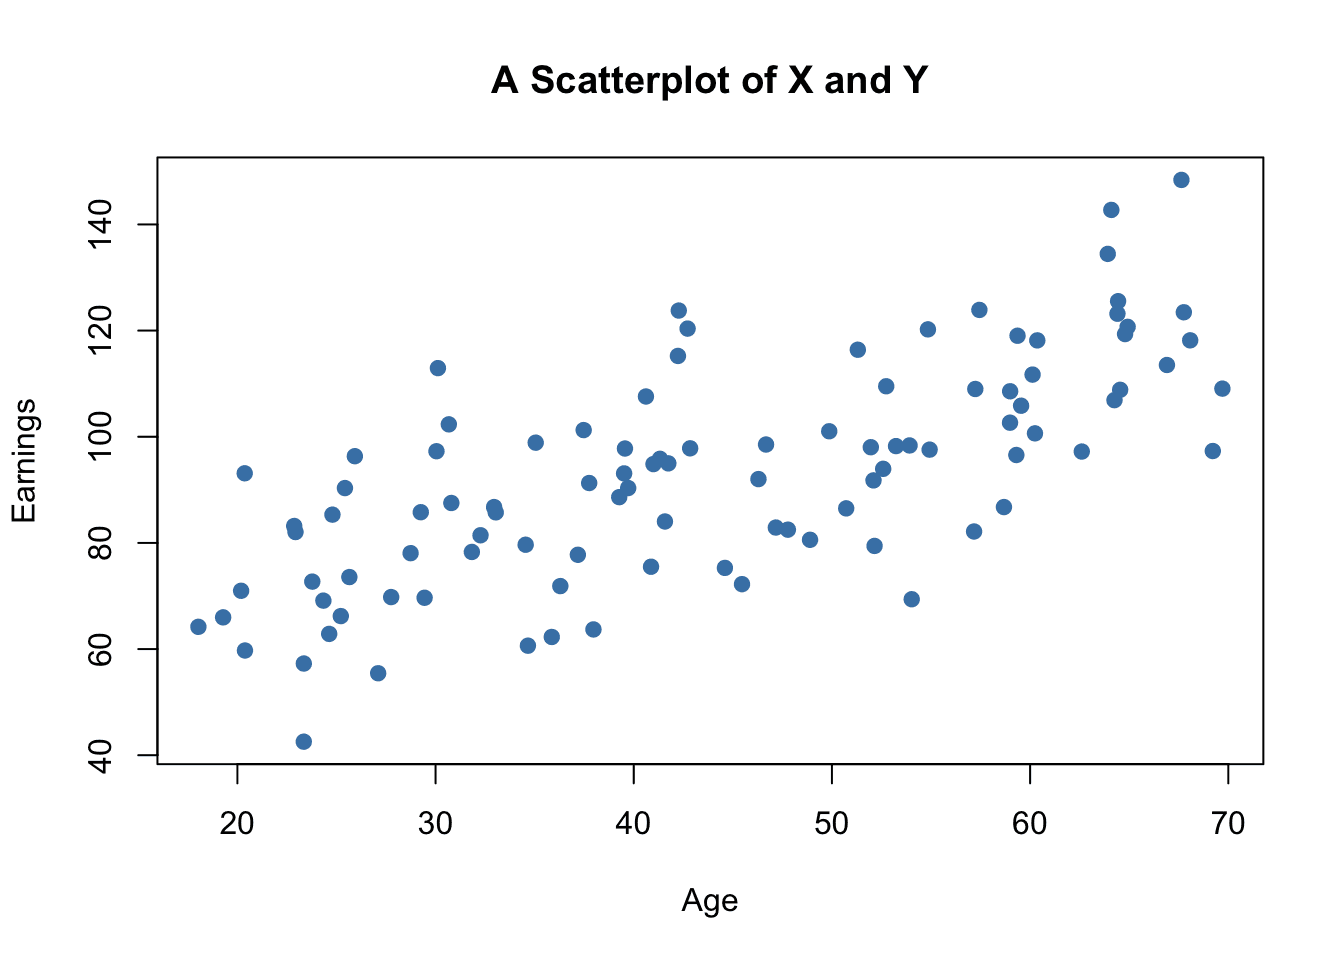 A sad scatterplot showing the inability of young people to earn money